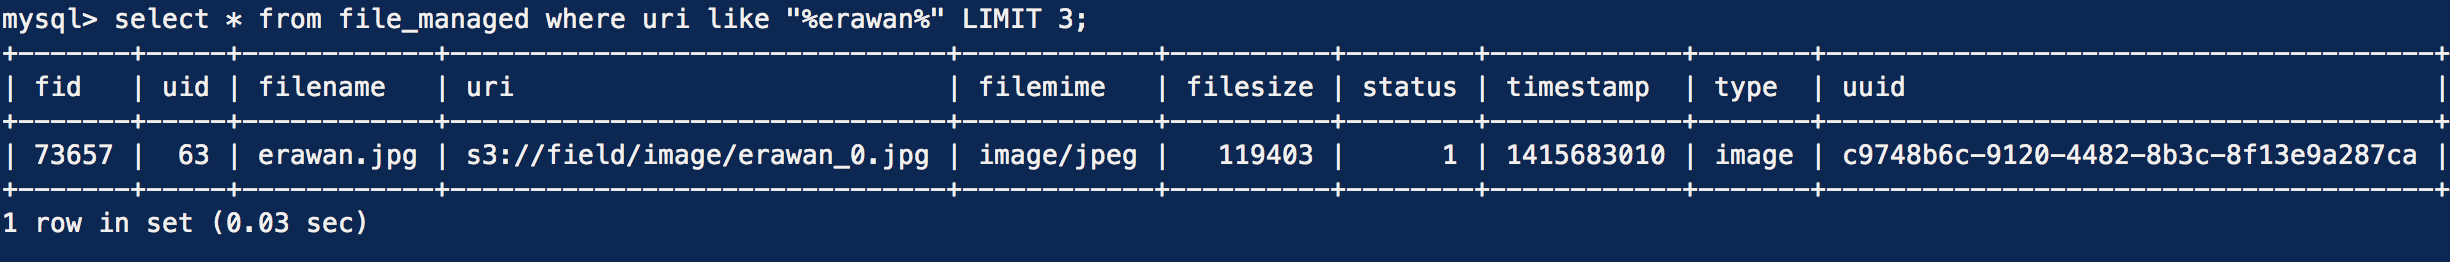 s3_db_file_managed